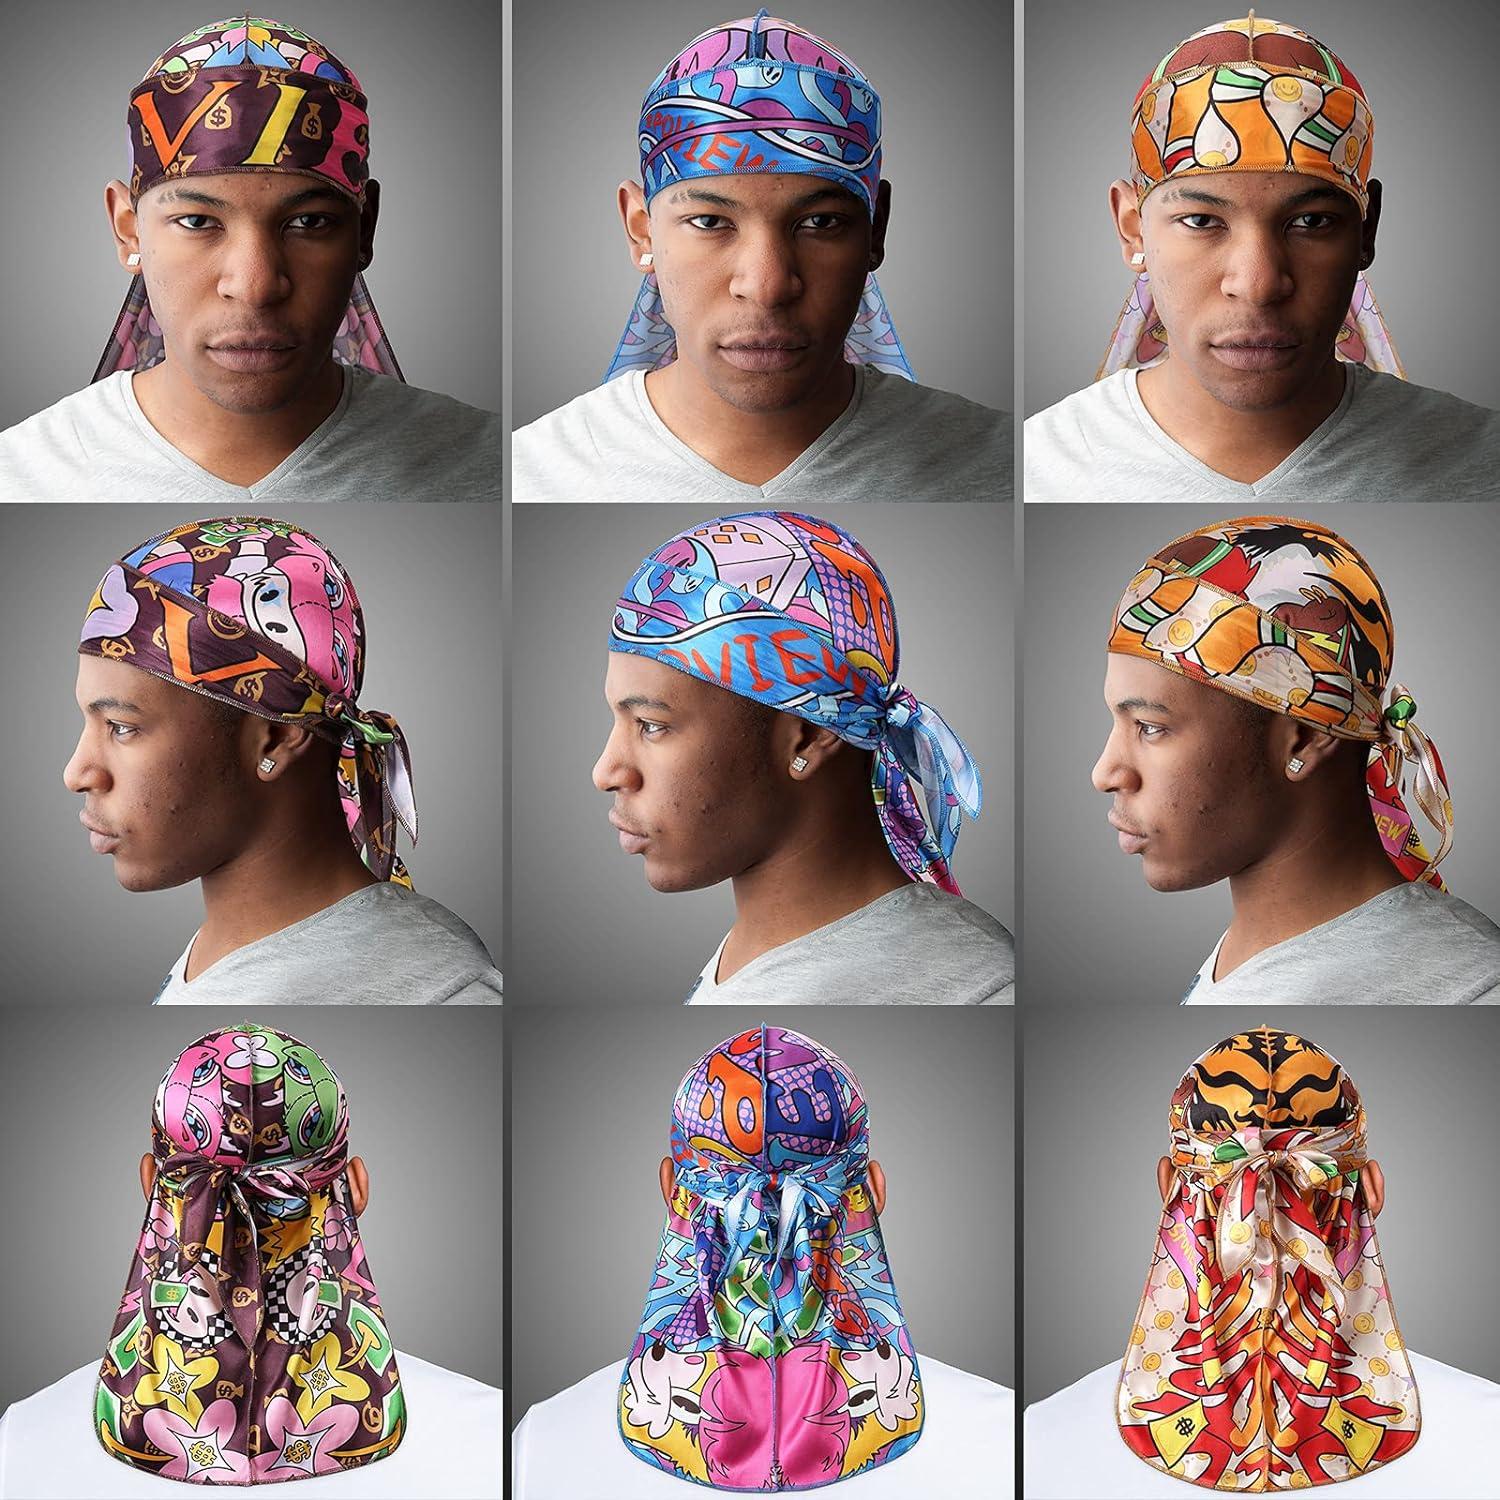 360 Waves: The Most Stylish Designer Durags for Silky Waves